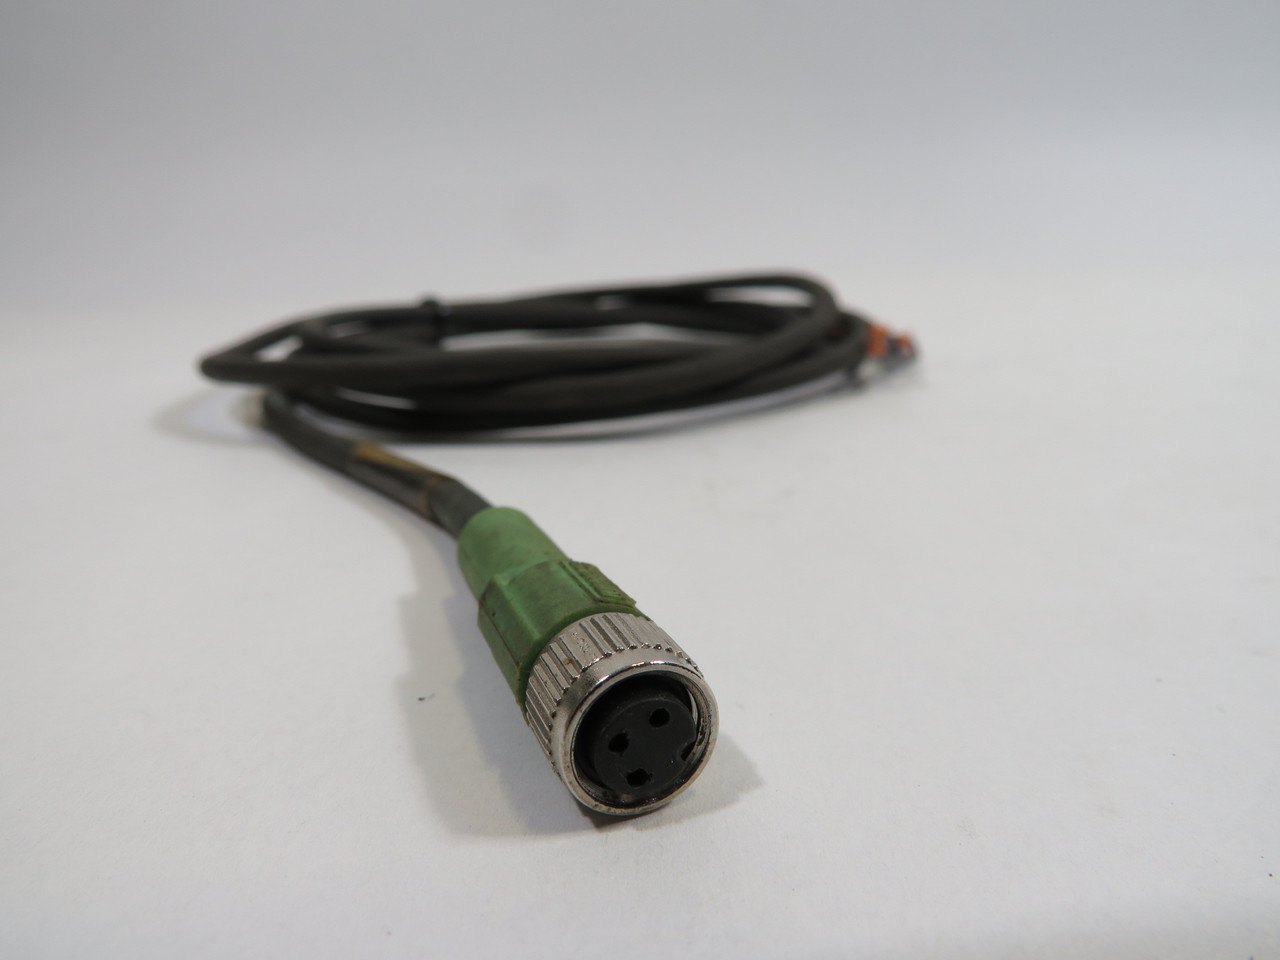 Phoenix Contact 1669628 Sensor Actuator Cable 1.7m Cut Cable USED